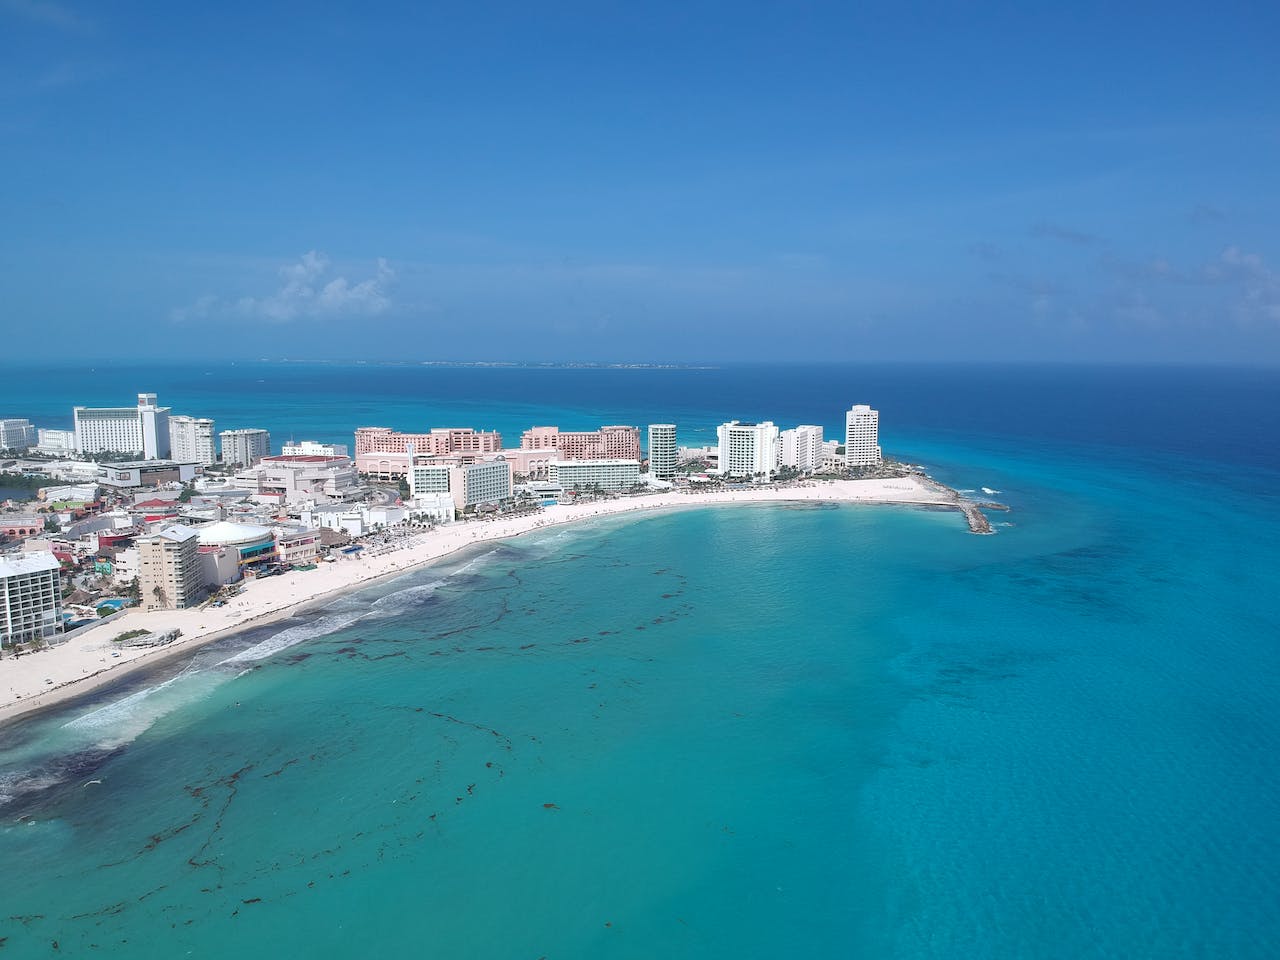 An aerial view of Cancun.